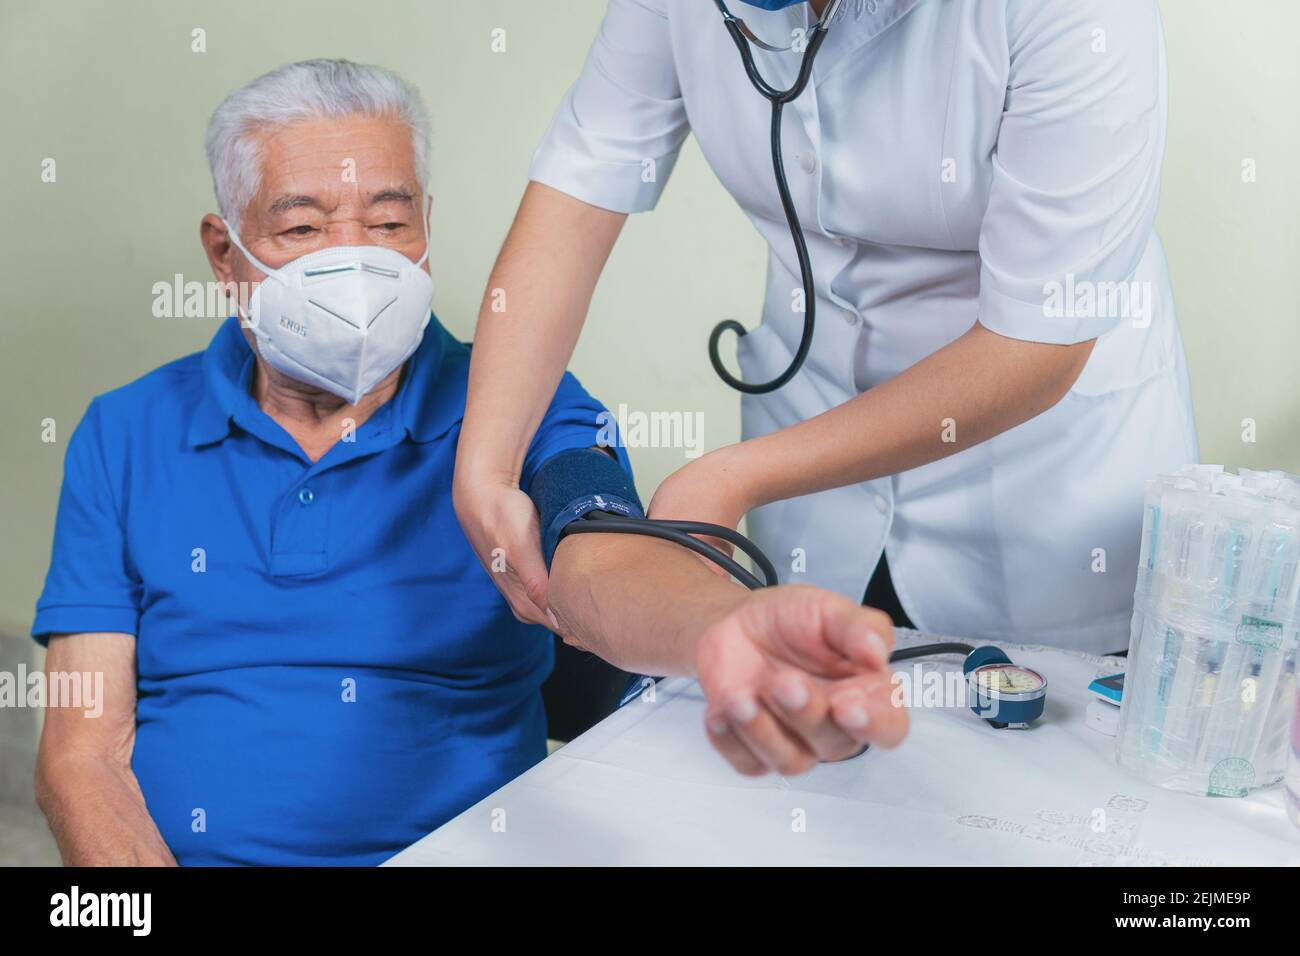 shows how to measure blood pressure in an older man Stock Photo